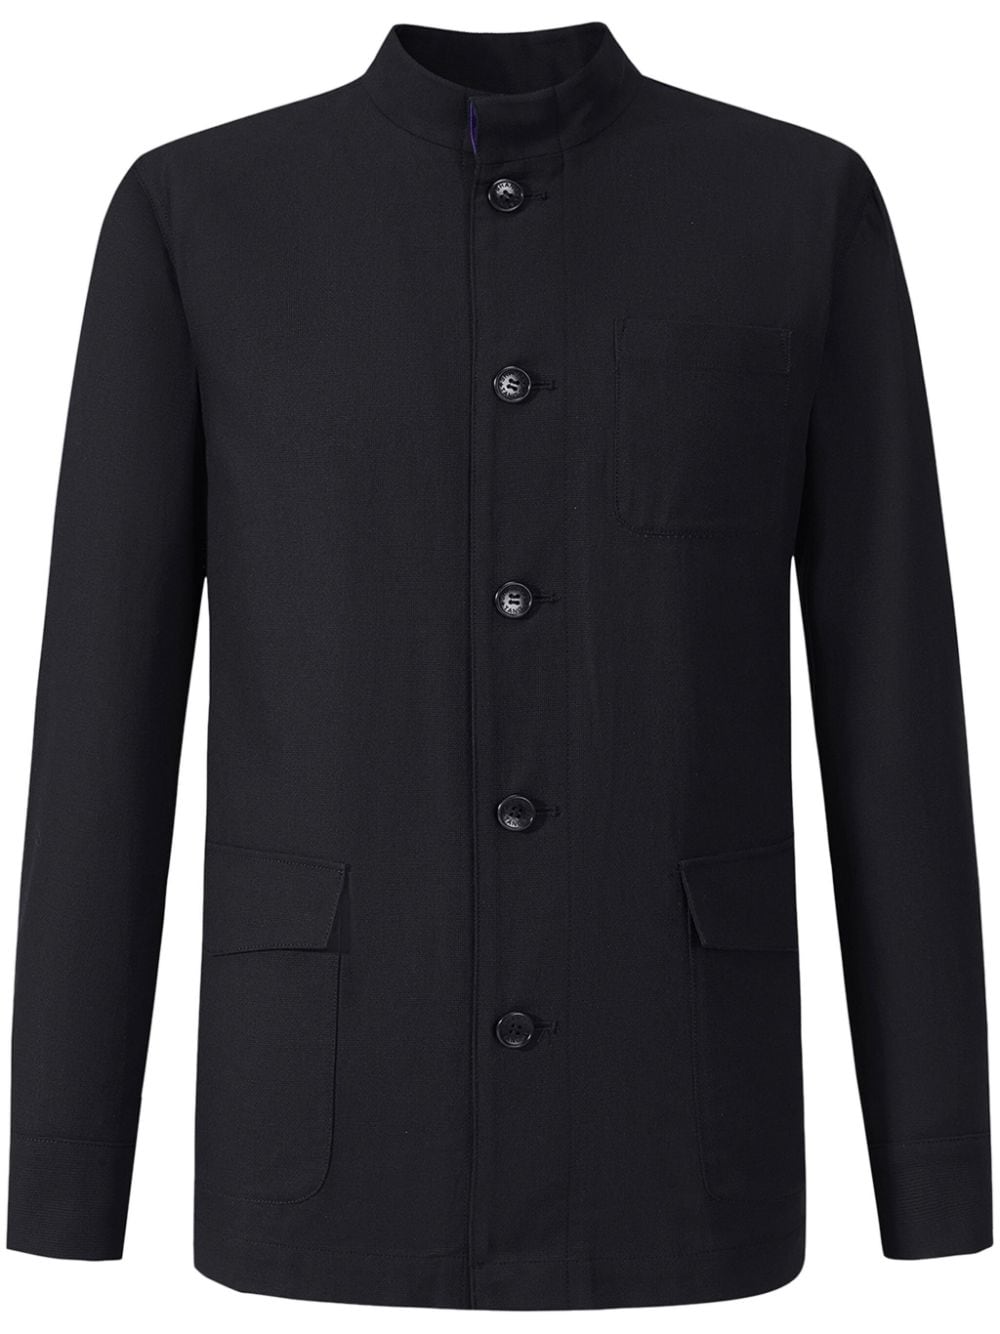 Shanghai Tang Button-up Cotton Jacket In Black